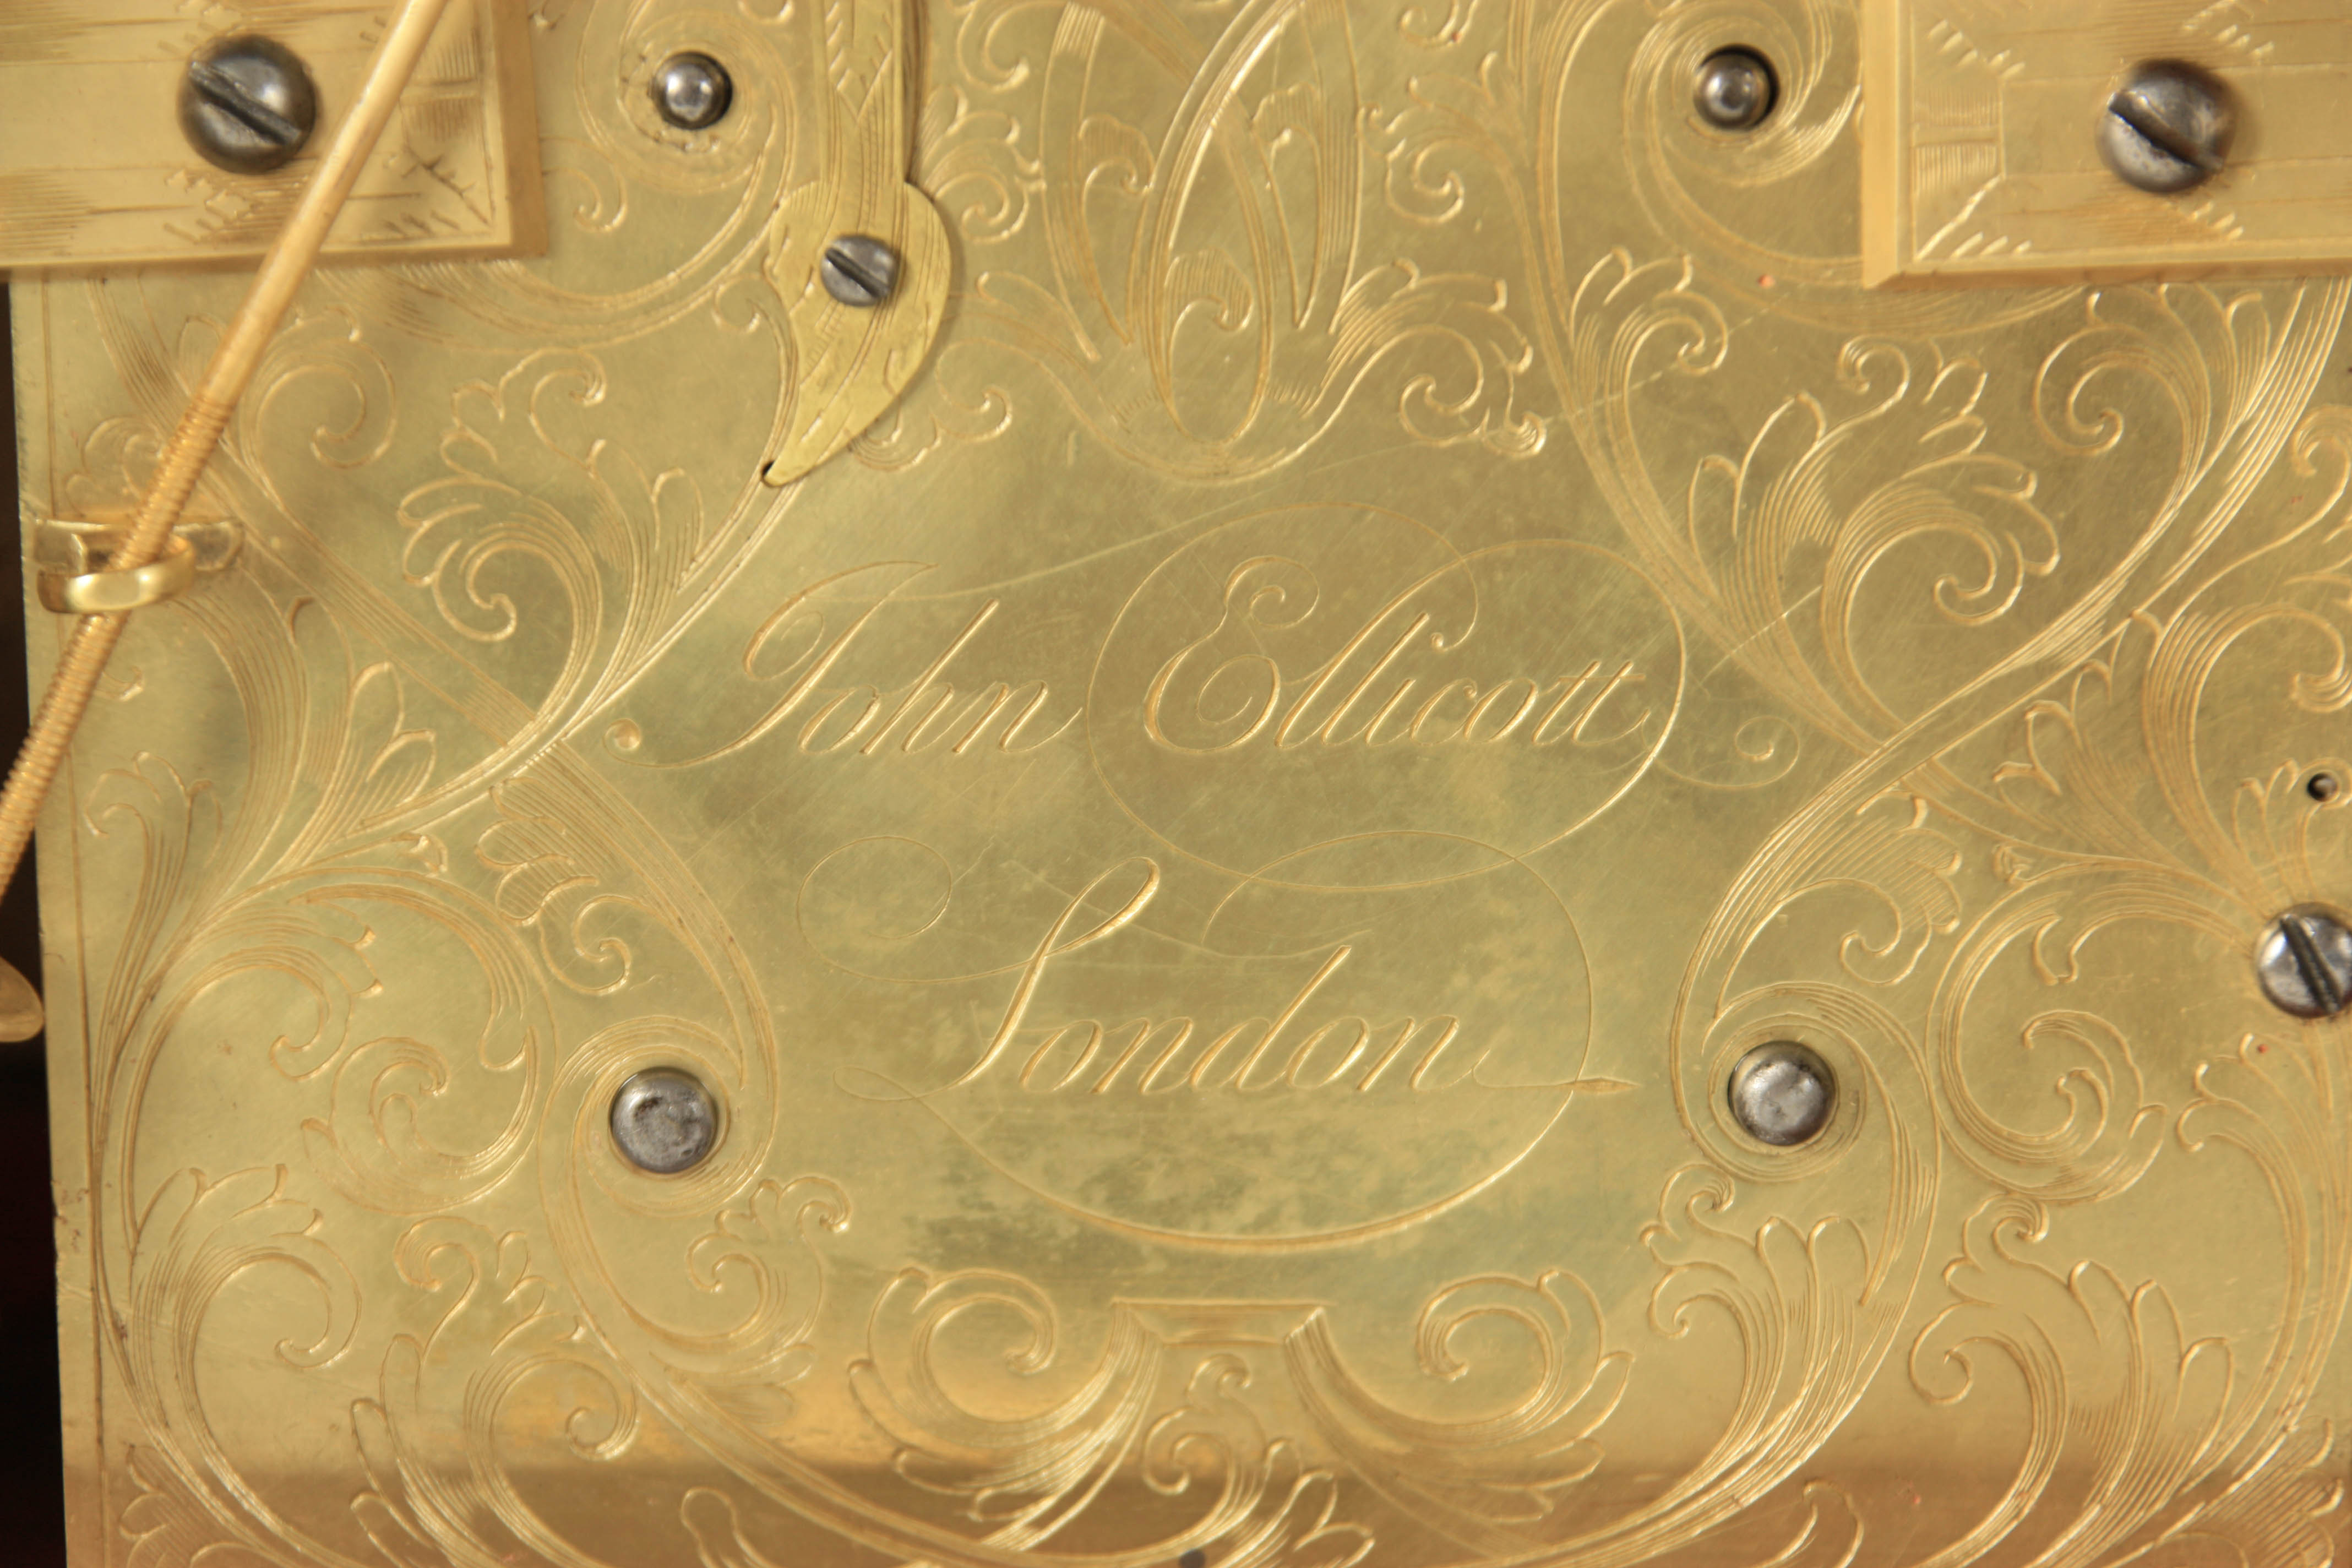 JOHN ELLICOTT, LONDON. A FINE GEORGE II GREEN LACQUER CHINOISERIE BRACKET CLOCK the bell top case - Image 6 of 7